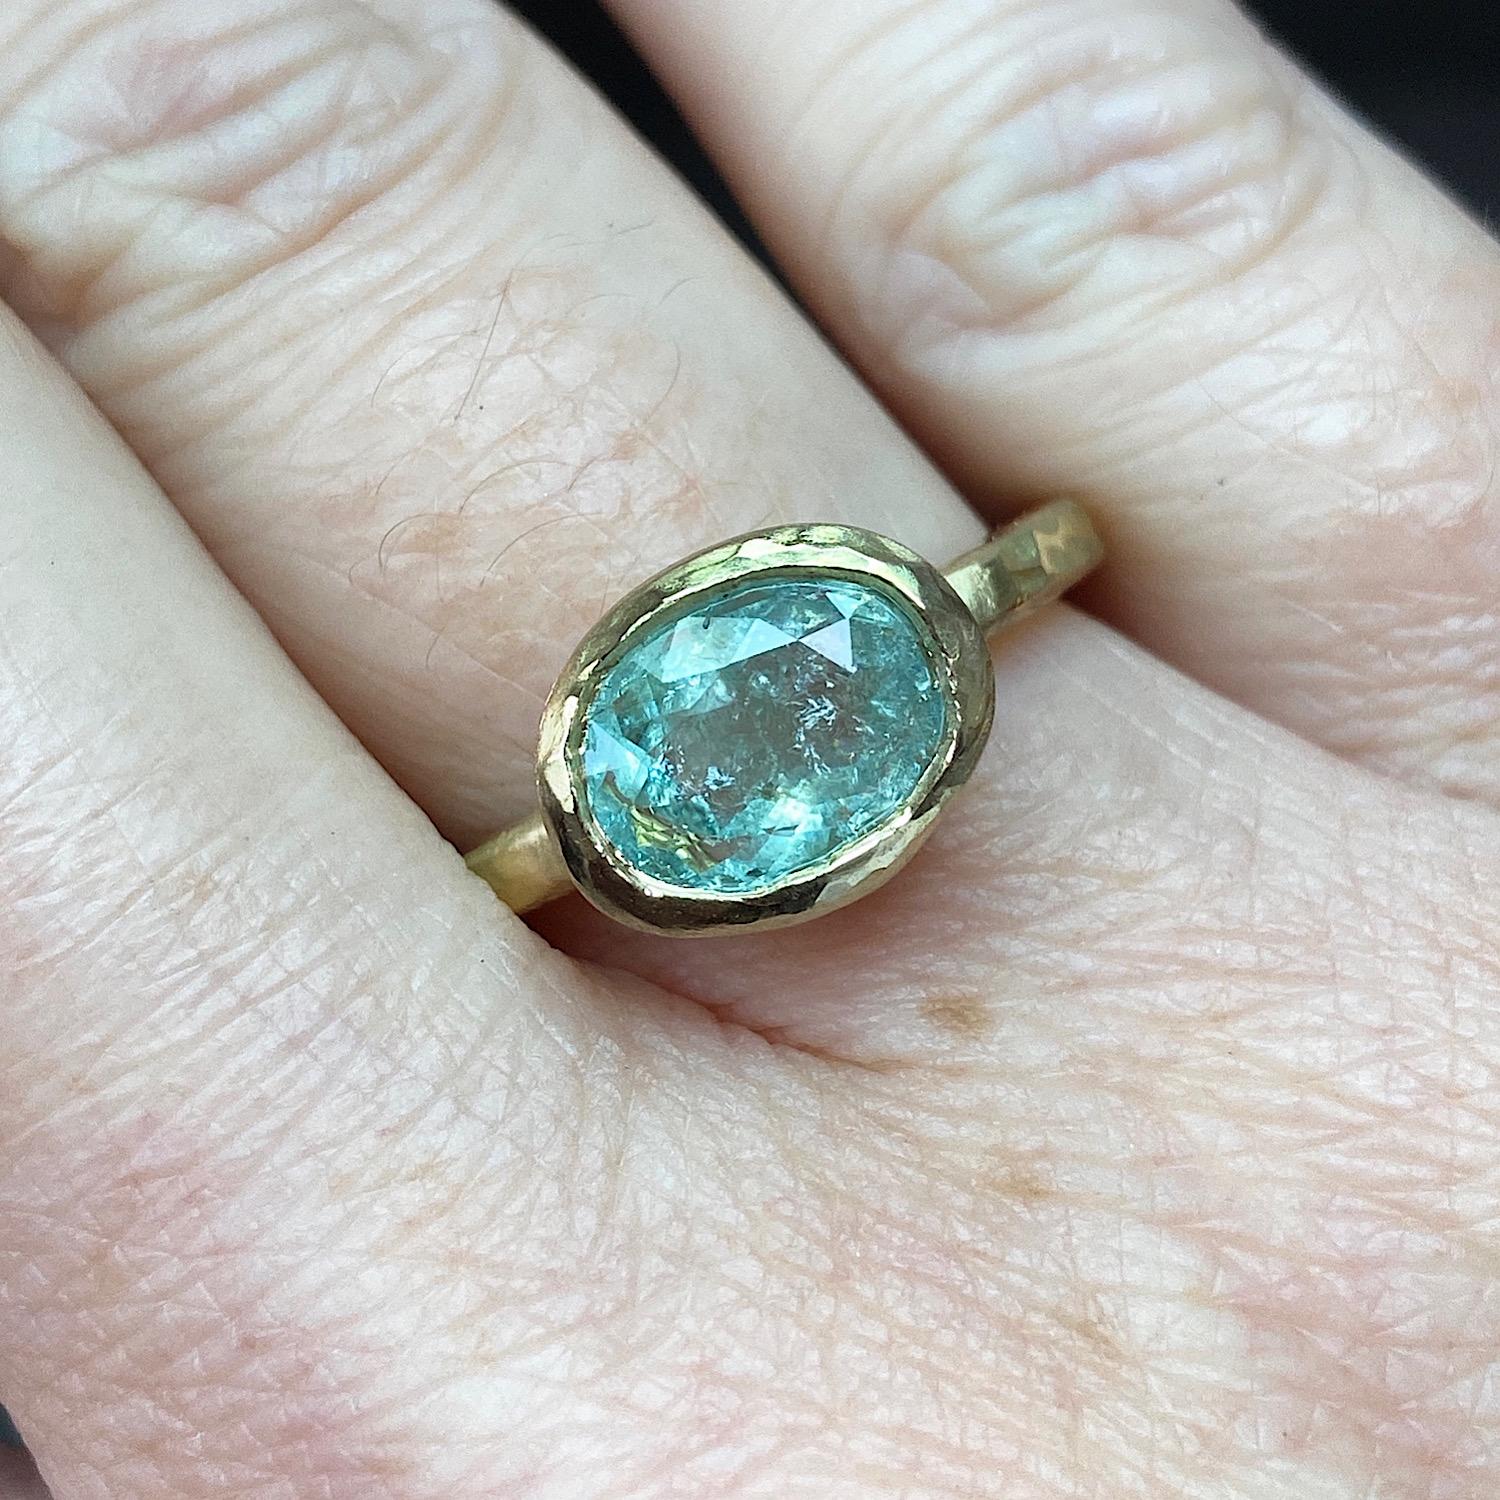 One of a Kind 18kt Yellow Gold Ring by Deborah Murdoch is from the Abundance Collection featuring an oval 1.70ct Blue Paraiba Stone. The ring band is slightly planished giving that textural feel and has a silky satin finish.

Metal: 18kt yellow